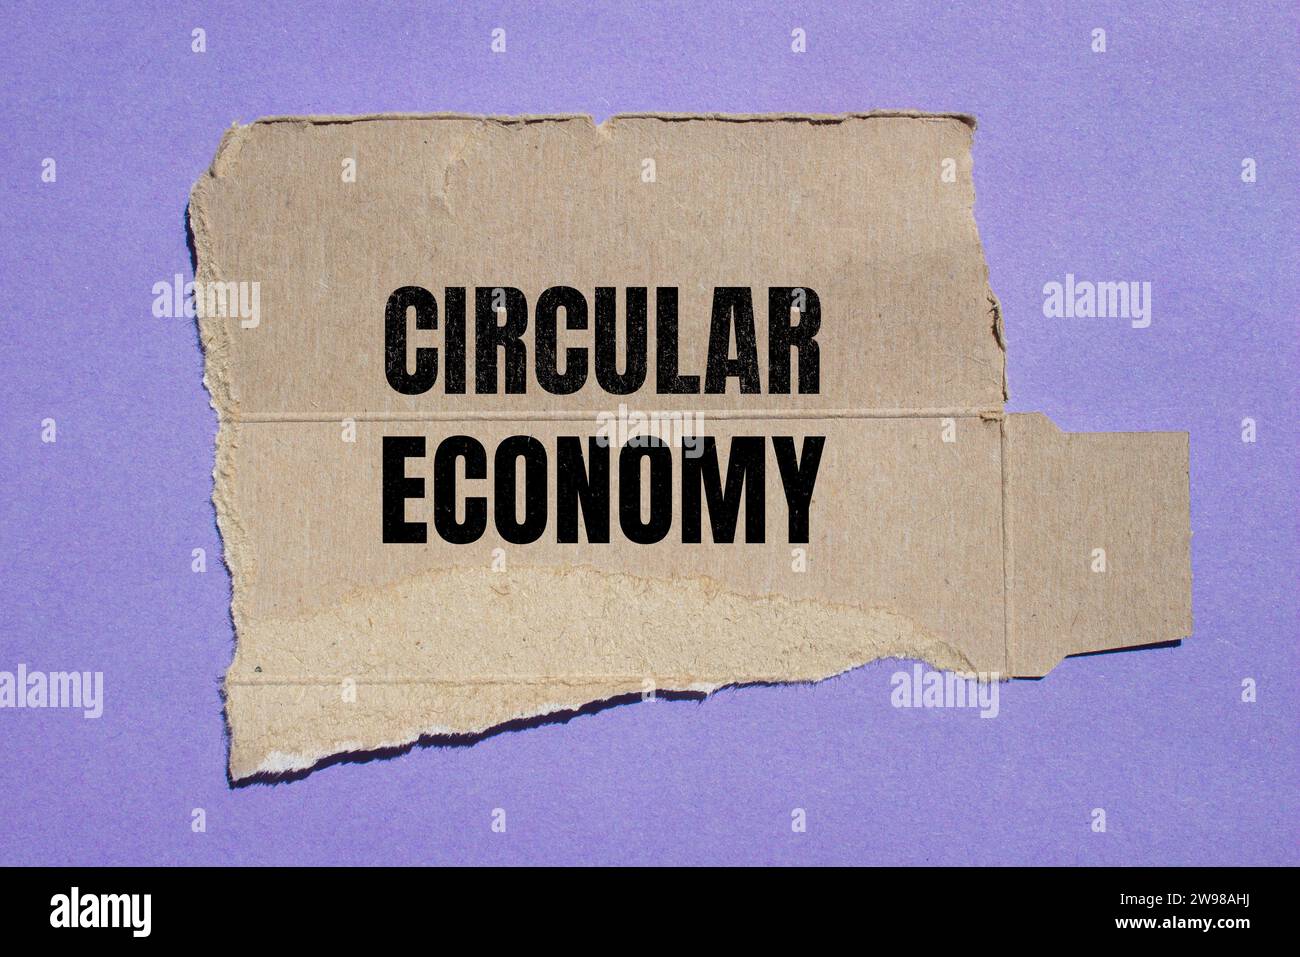 Circular economy lettering on ripped paper. Business concept photo. Stock Photo